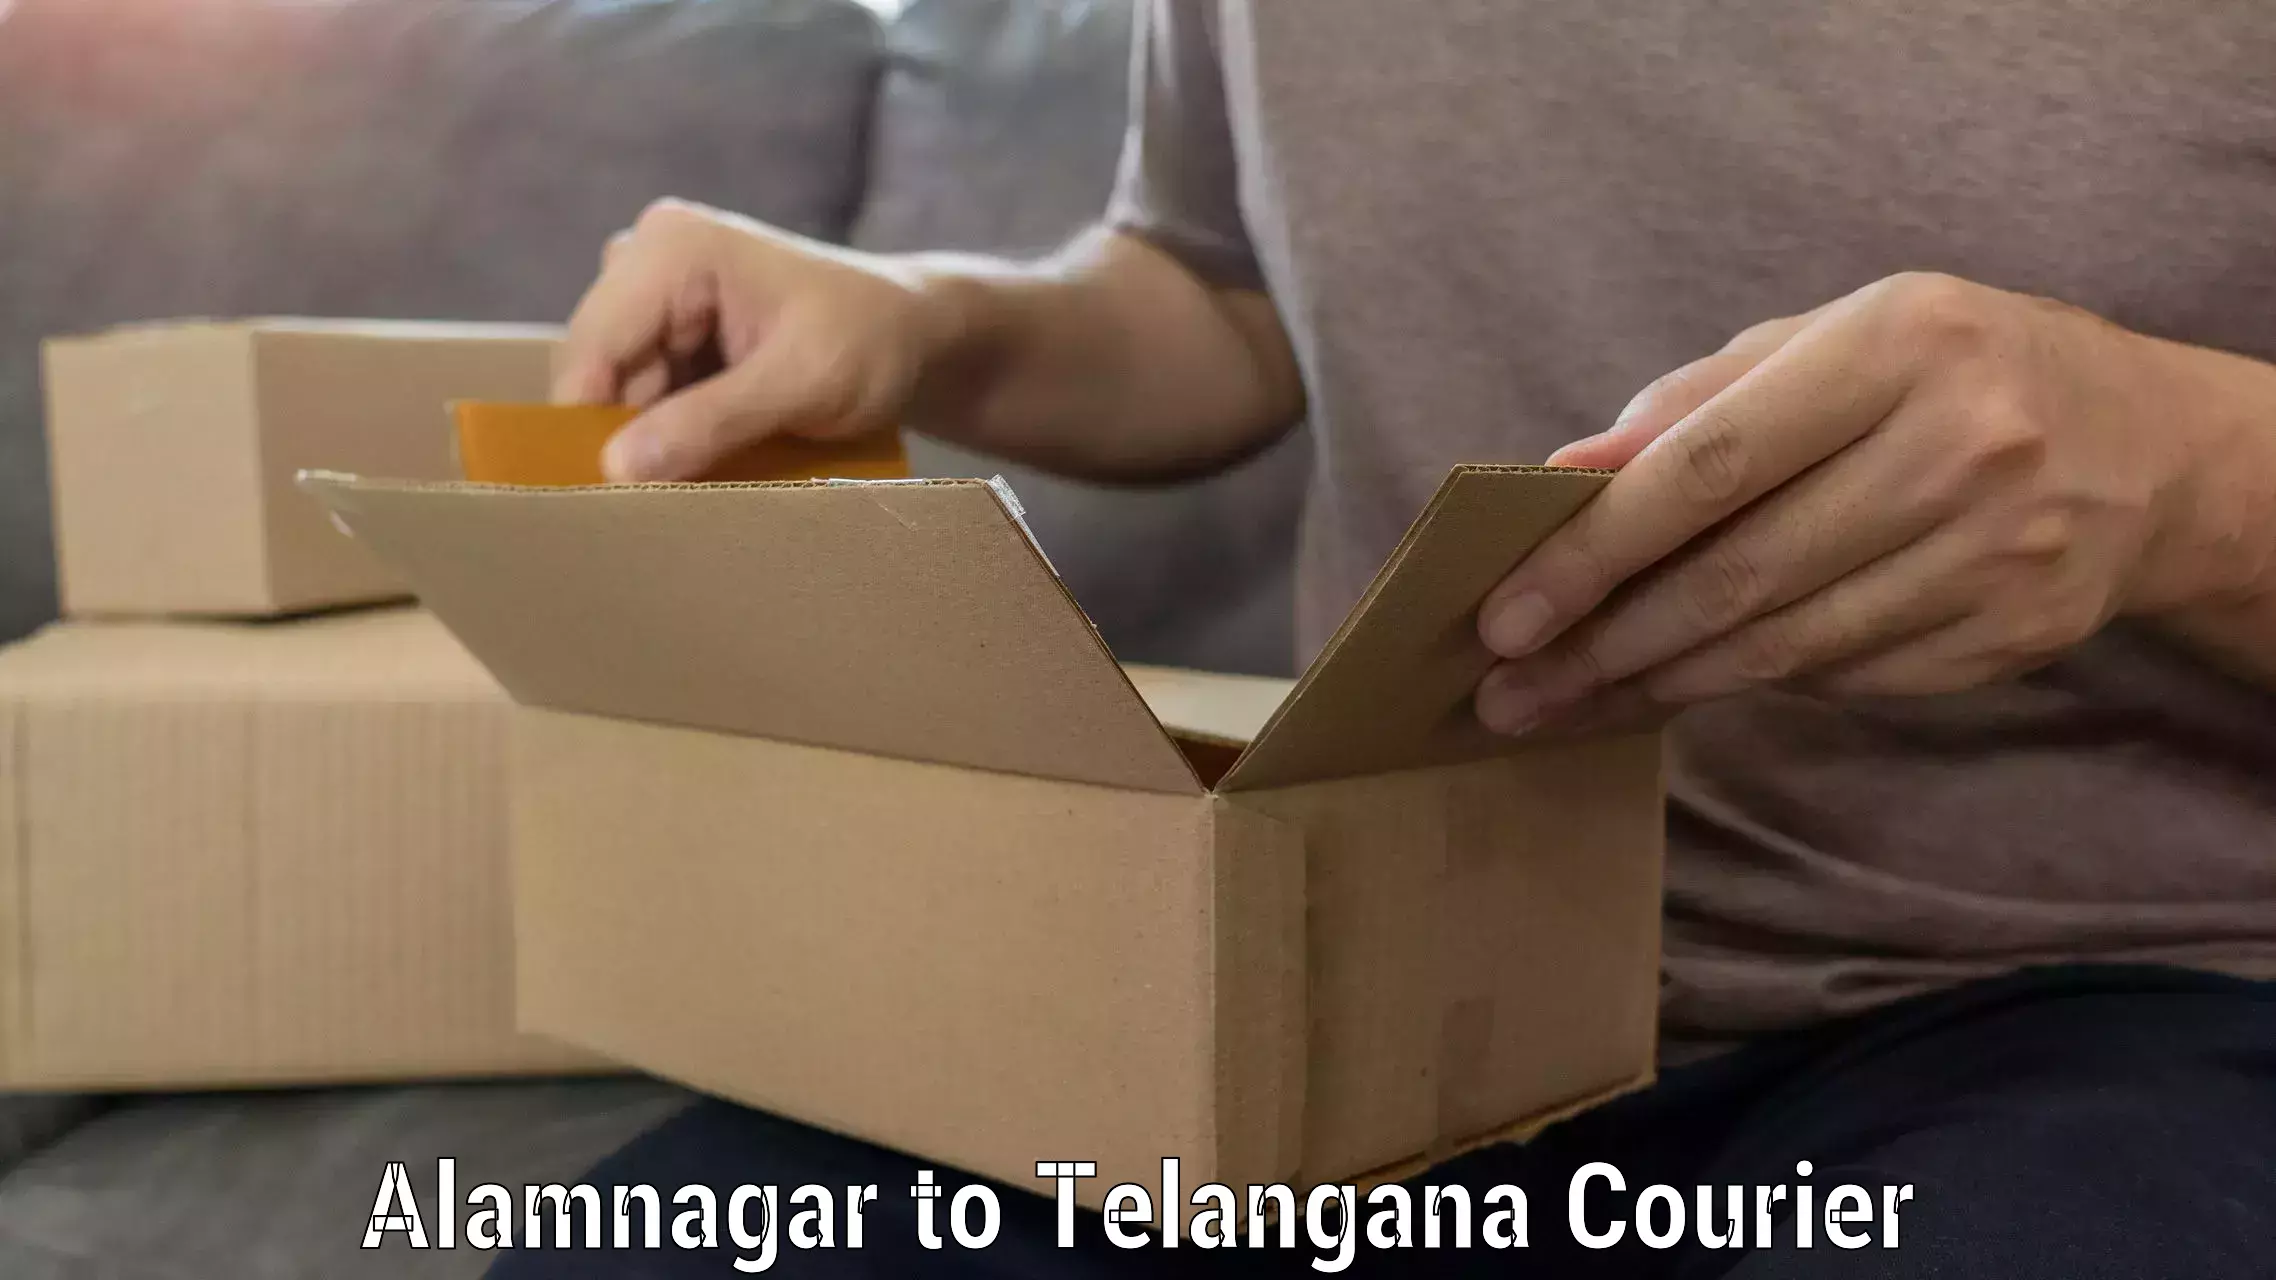 Affordable relocation services Alamnagar to Hyderabad